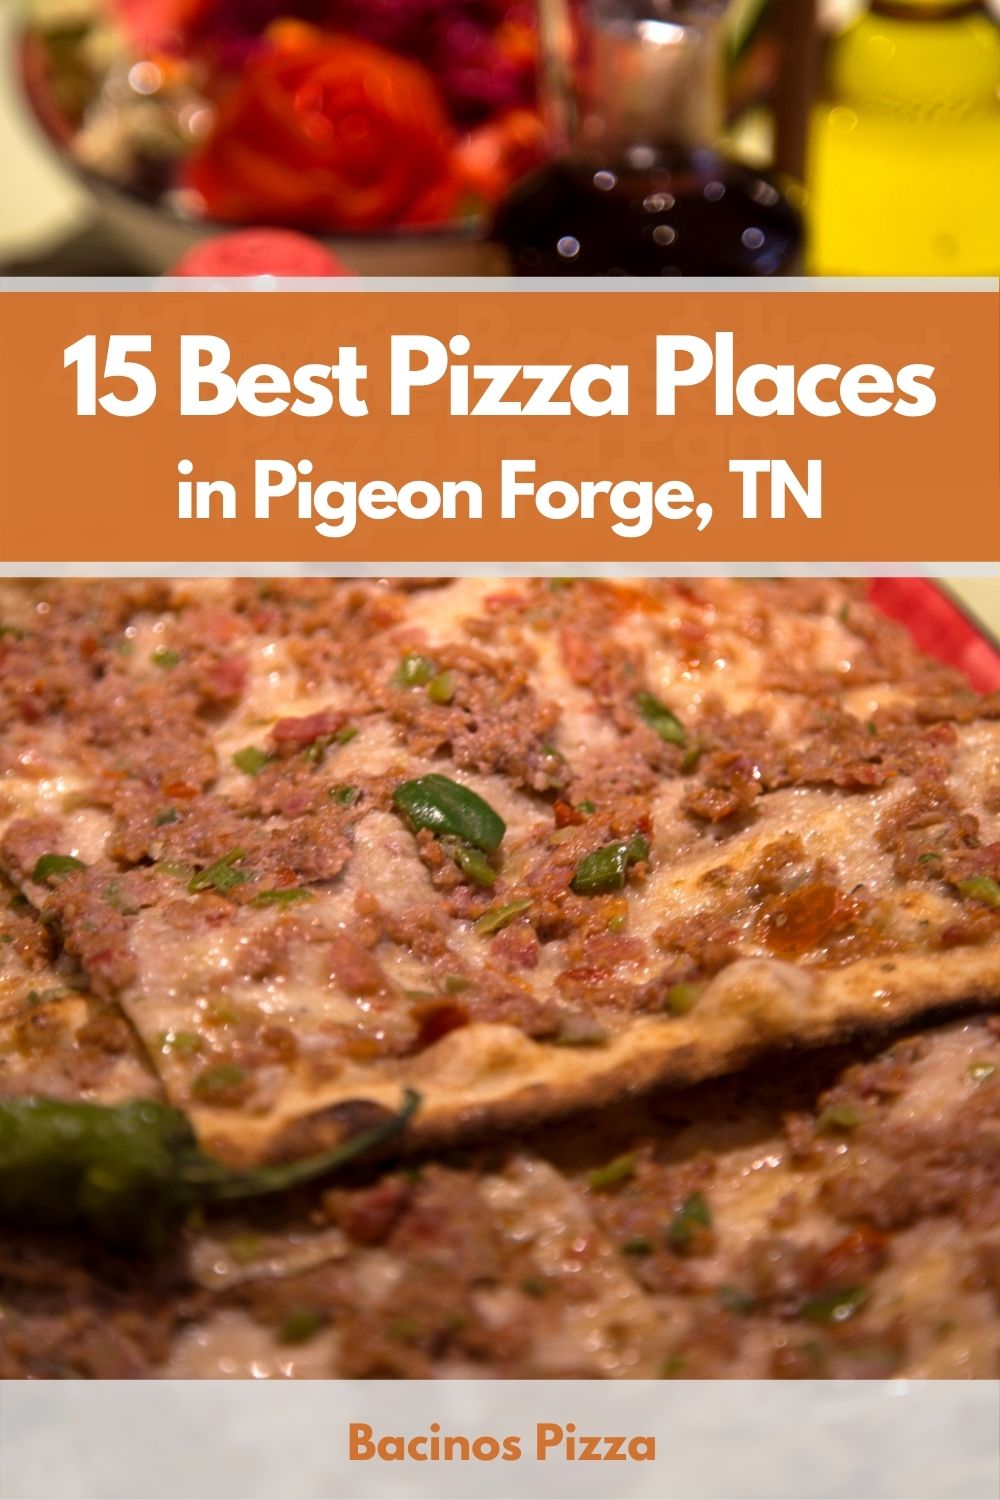 15 Best Pizza Places in Pigeon Forge, TN pin